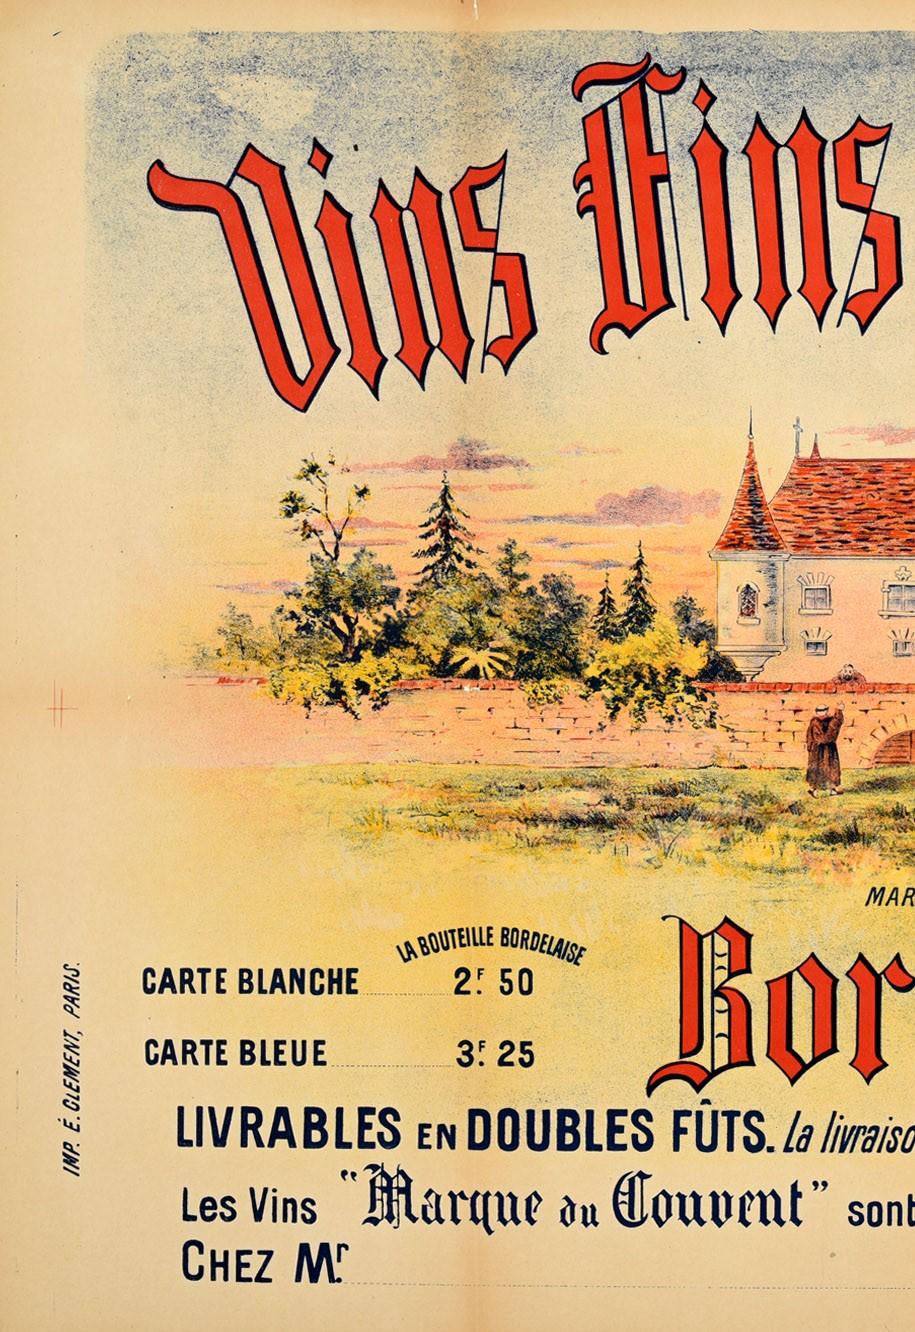 Original antique French drink advertising poster for Bordeaux wine - Vins Fins marque du Convent Bordeaux / fine wines from the Convent - featuring detailed artwork showing monks walking along a wall in the green gardens around the convent building